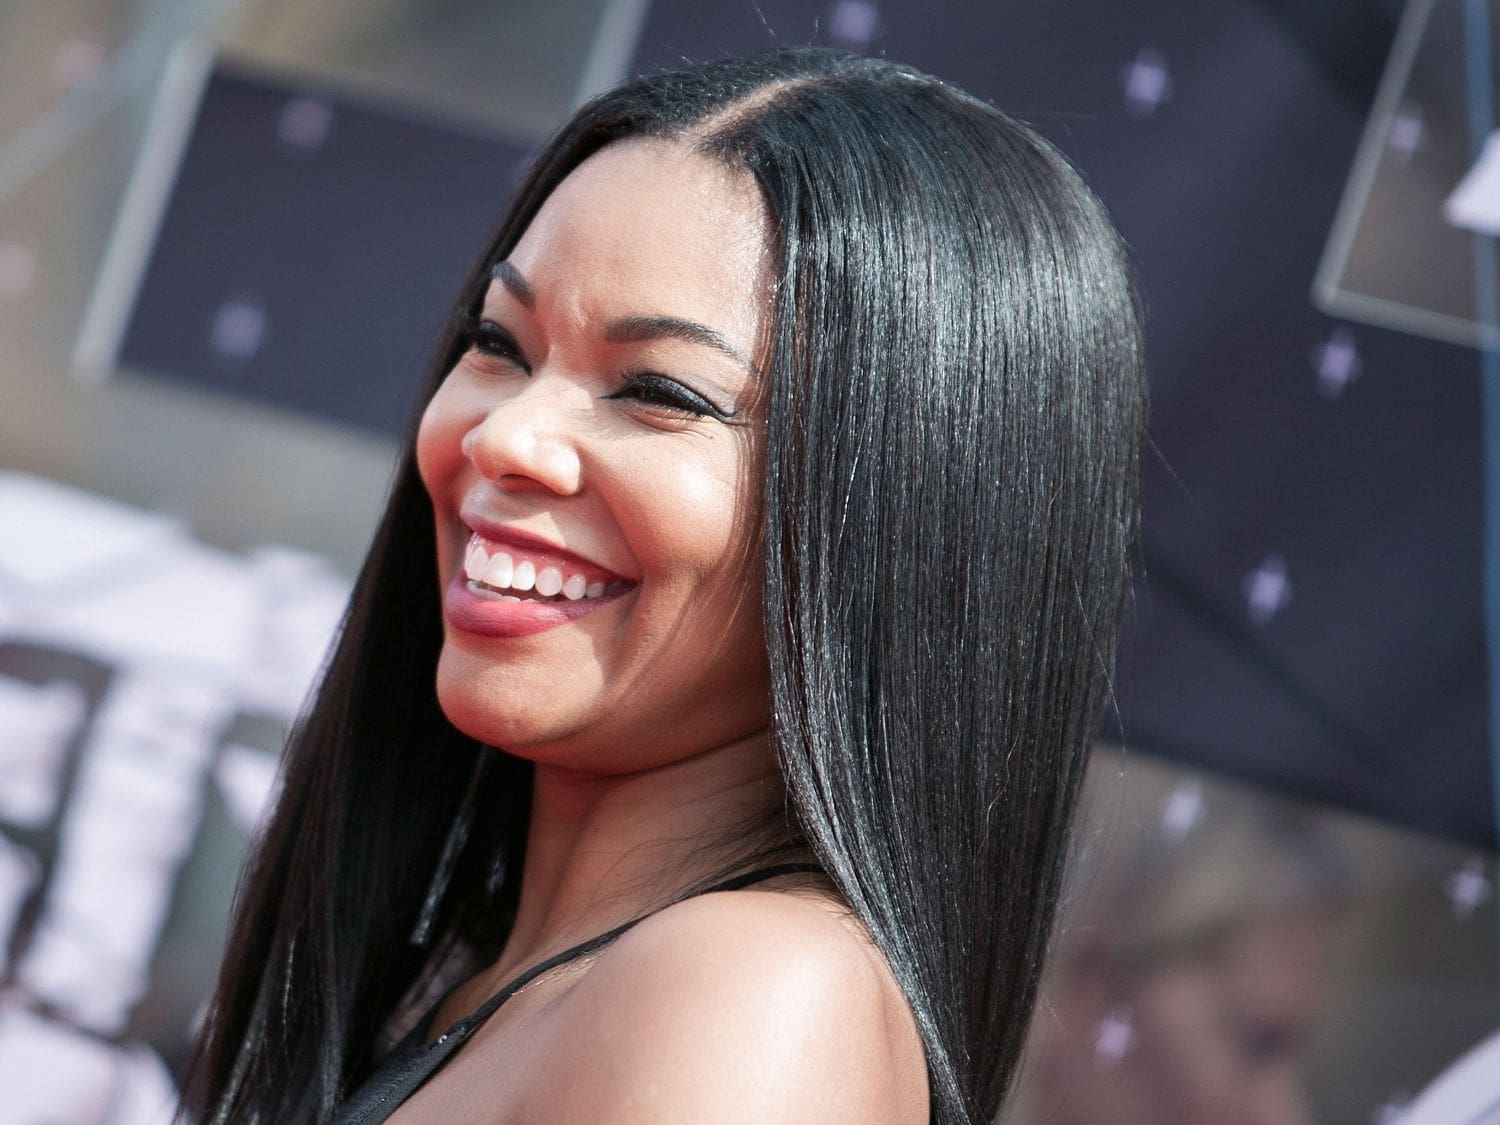 Gabrielle Union Shares New Pics Featuring Her Daughter - Fans Are In Love With Kaavia James